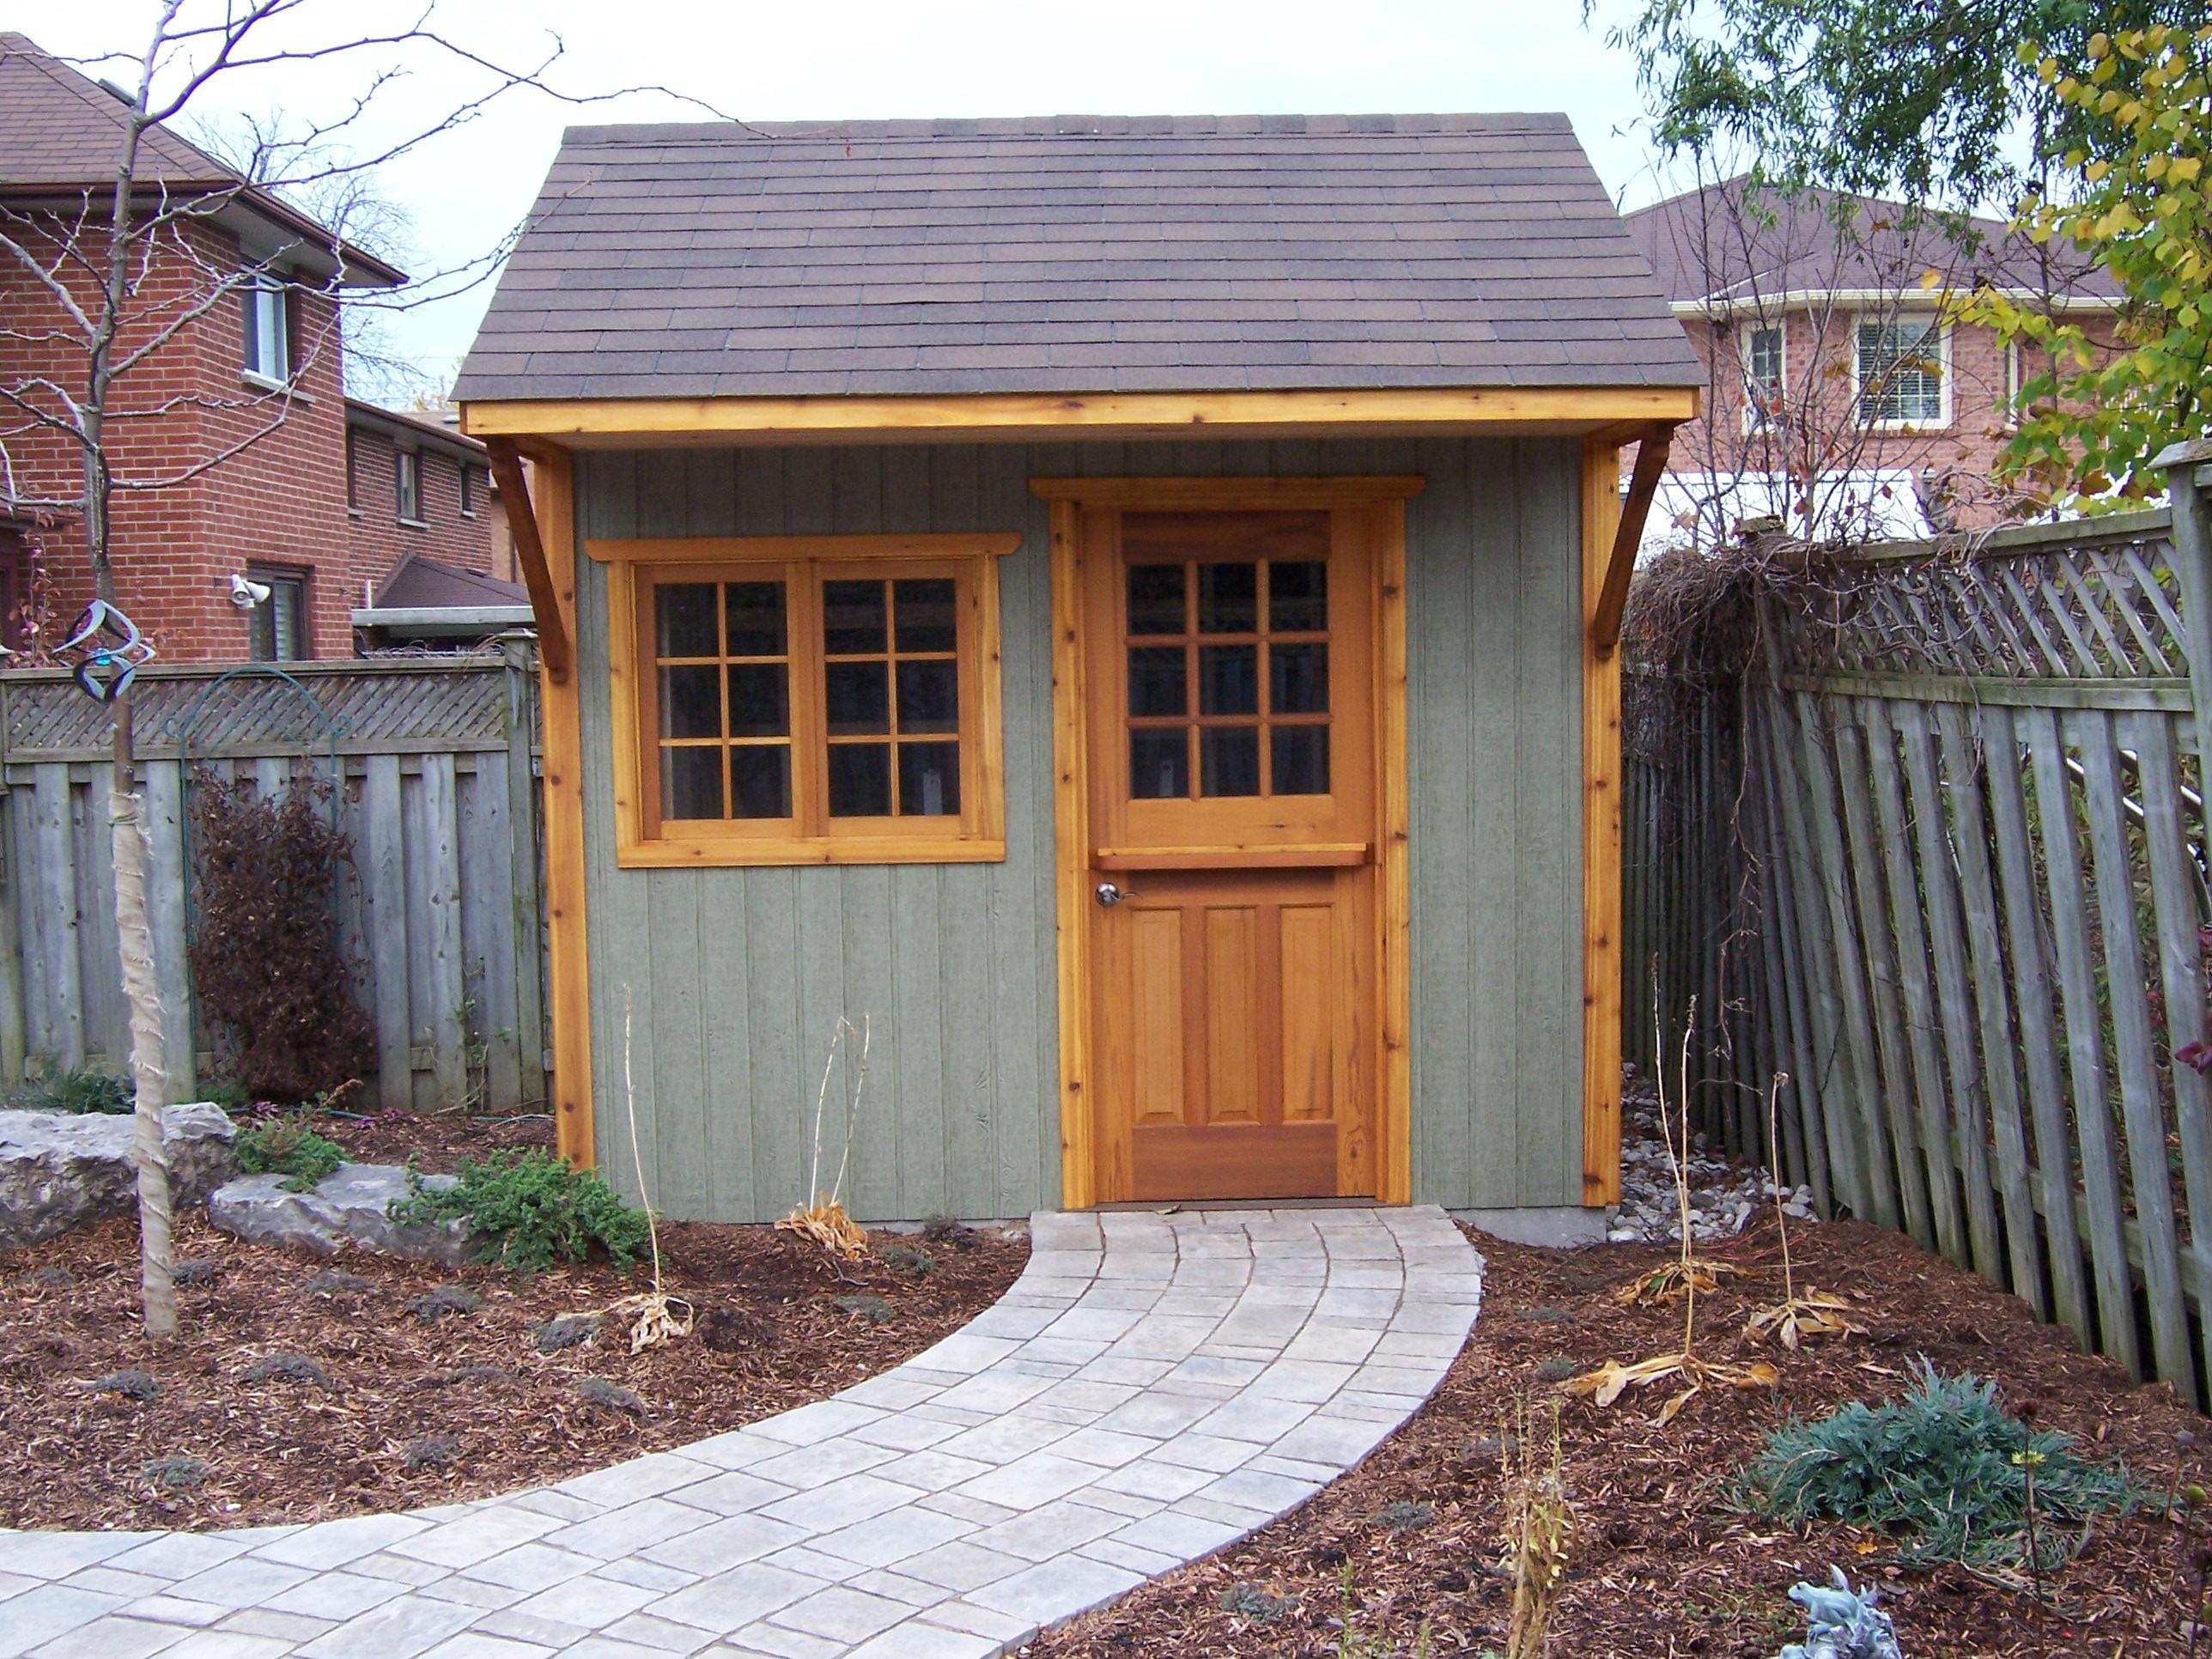 Canexel Glen Echo garden shed with bar window in Toronto Ontario. ID number 185988-2